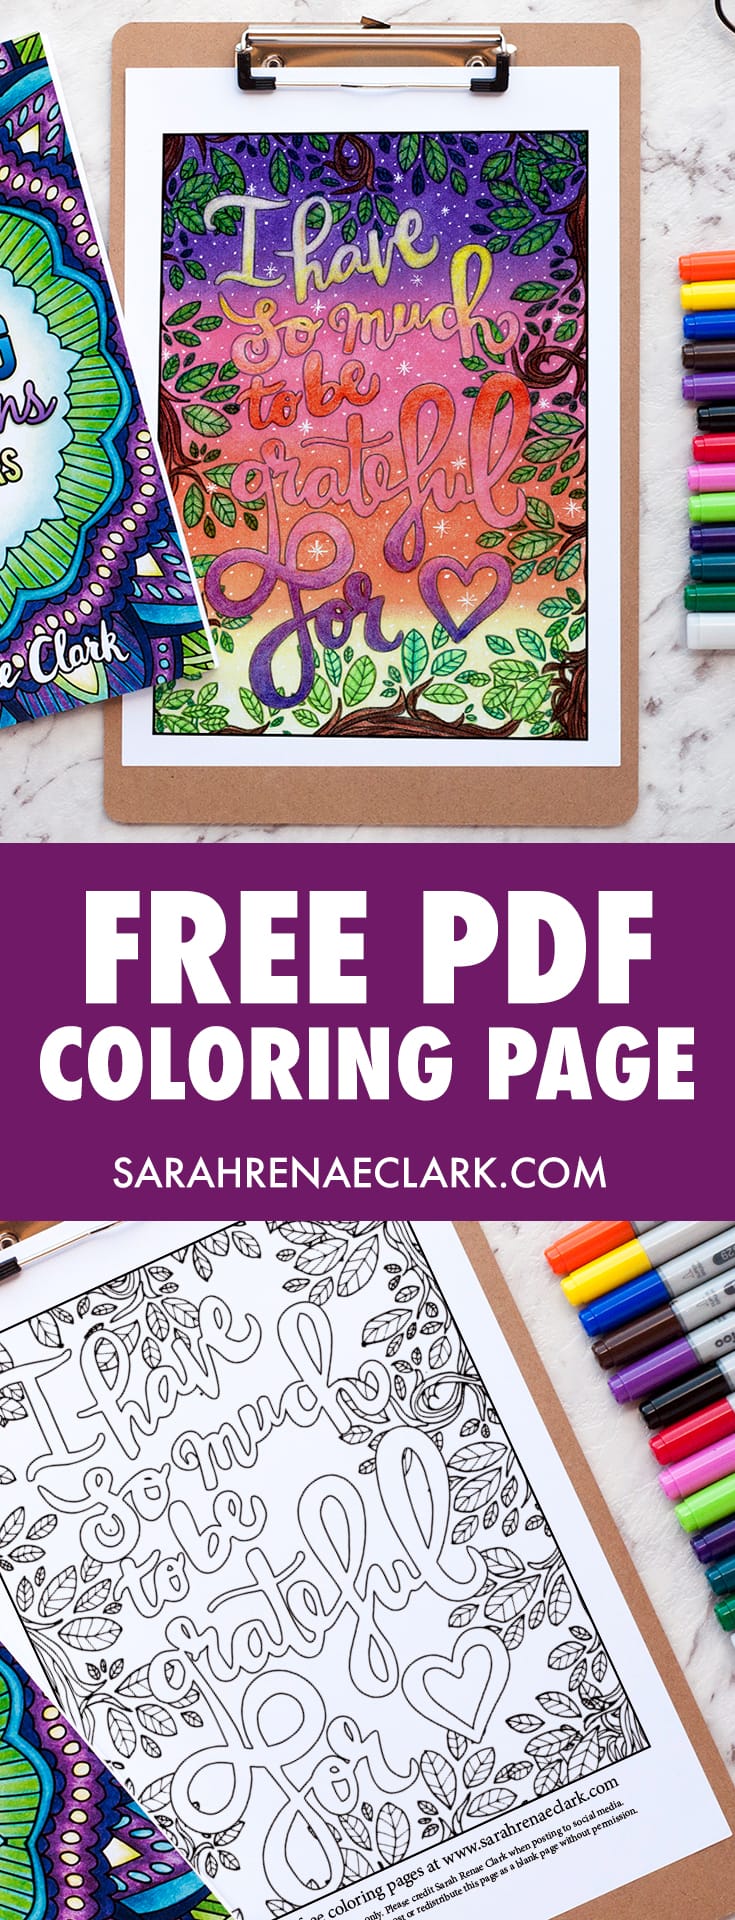 This free coloring page is a lovely reminder to be thankful in every situation. Get it free from www.sarahrenaeclark.com | Colored by Debbie Schroeder, this coloring page is from "A Year of Coloring Affirmations For New Mothers" adult coloring book by Sarah Renae Clark